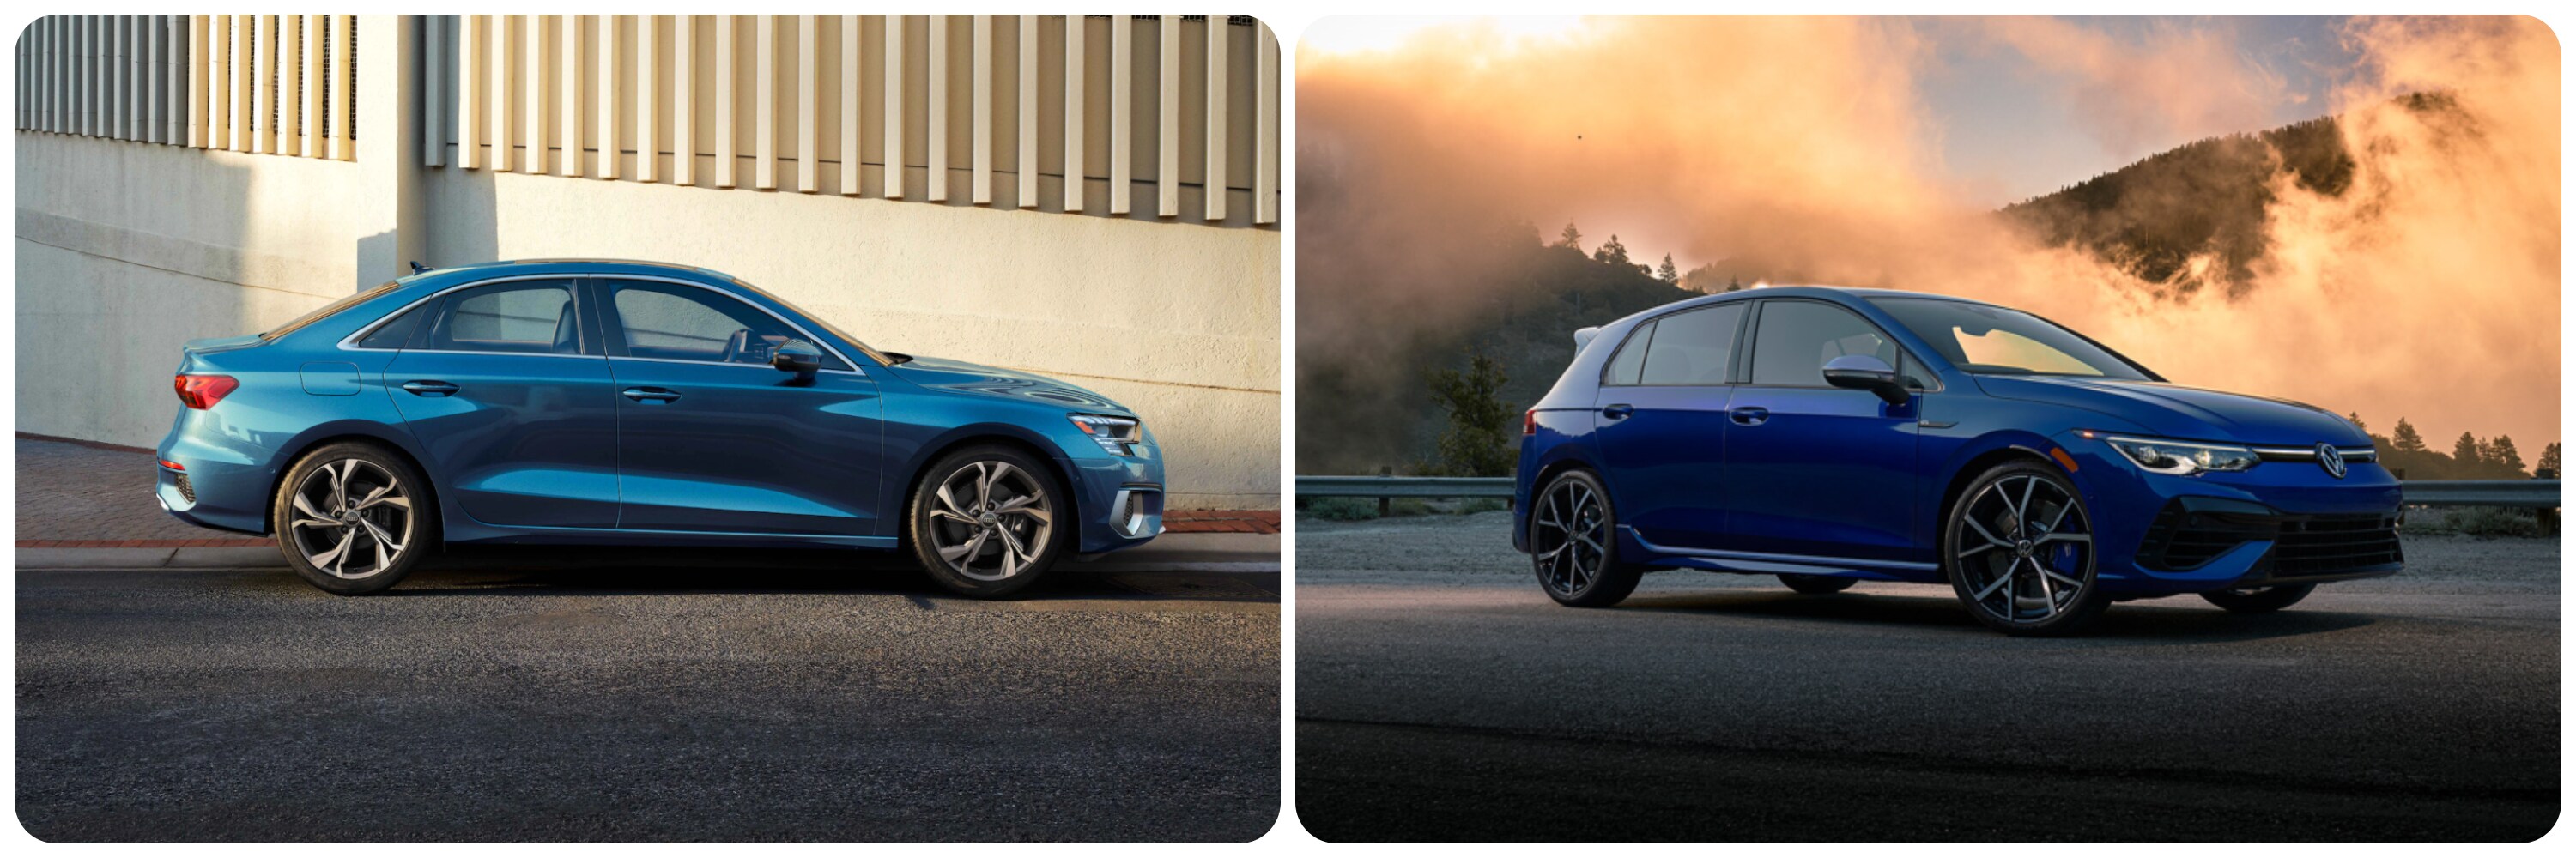 On the left a profile view of a bright blue 2022 Audi A3 as it sits parked on a city street on a sunny day.  On the right, a deep indigo 2022 Volkswagen Golf-R sits parked on a mountain road with the morning sun burning off the morning fog from the mountains in the background.